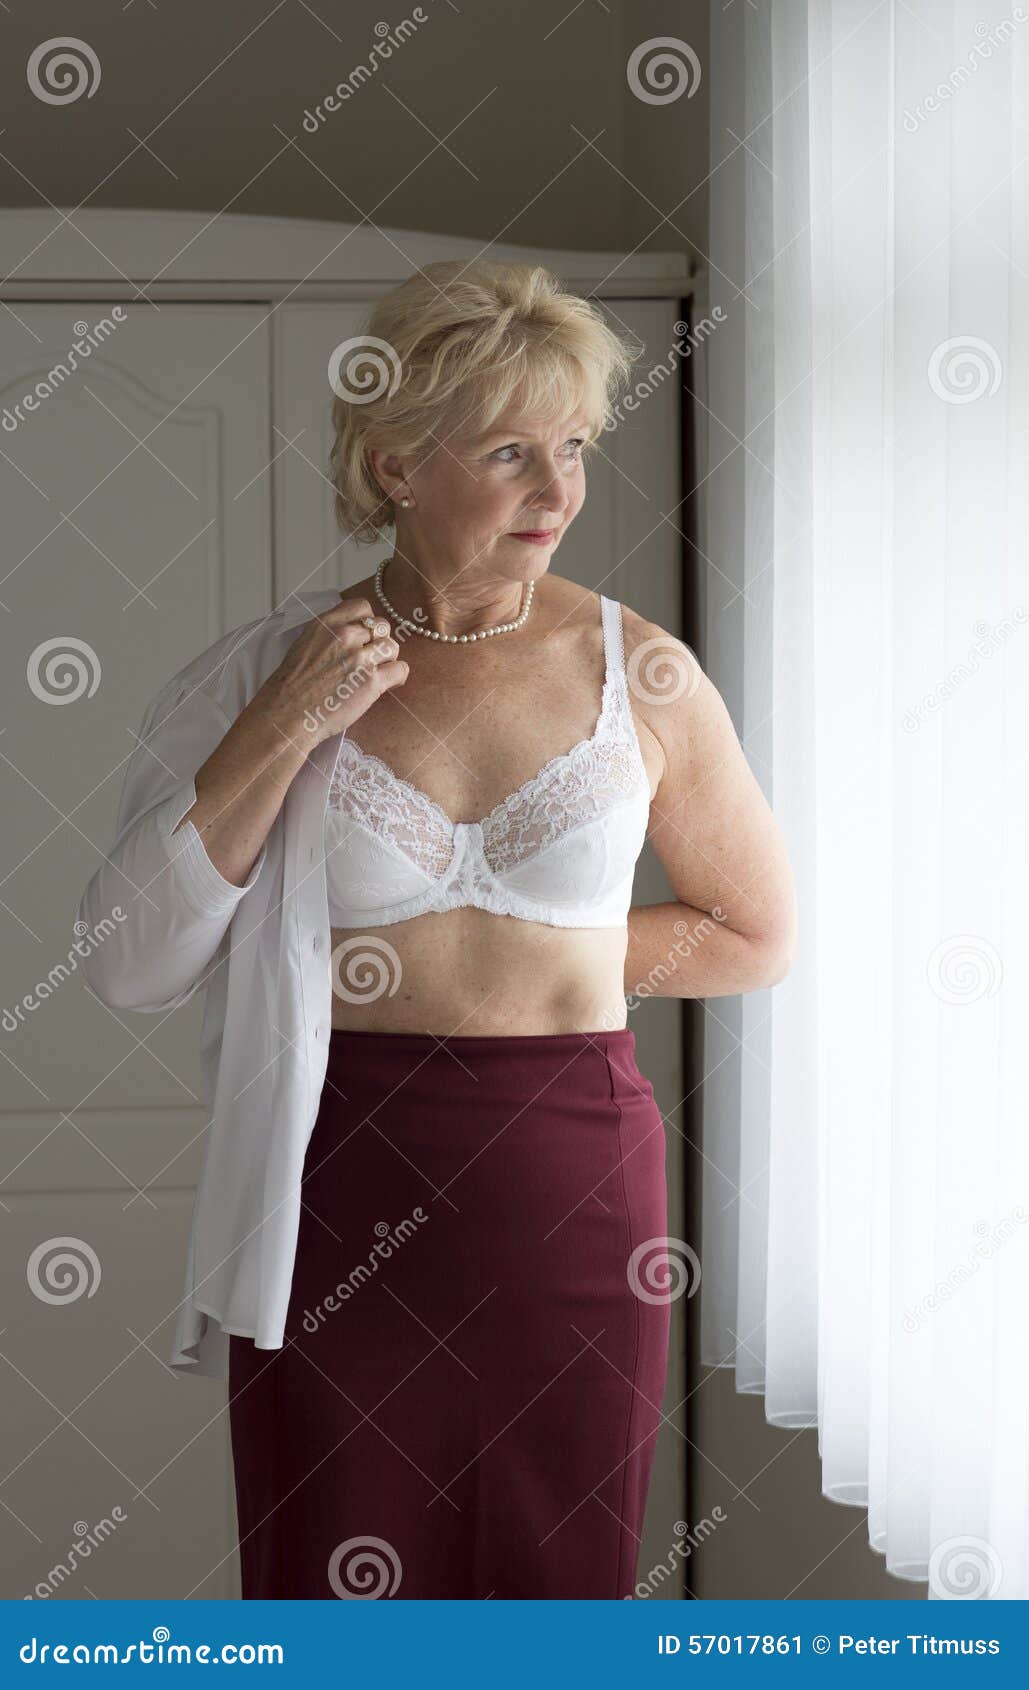 Woman getting dressed stock image. Image of woman, putting - 57017861